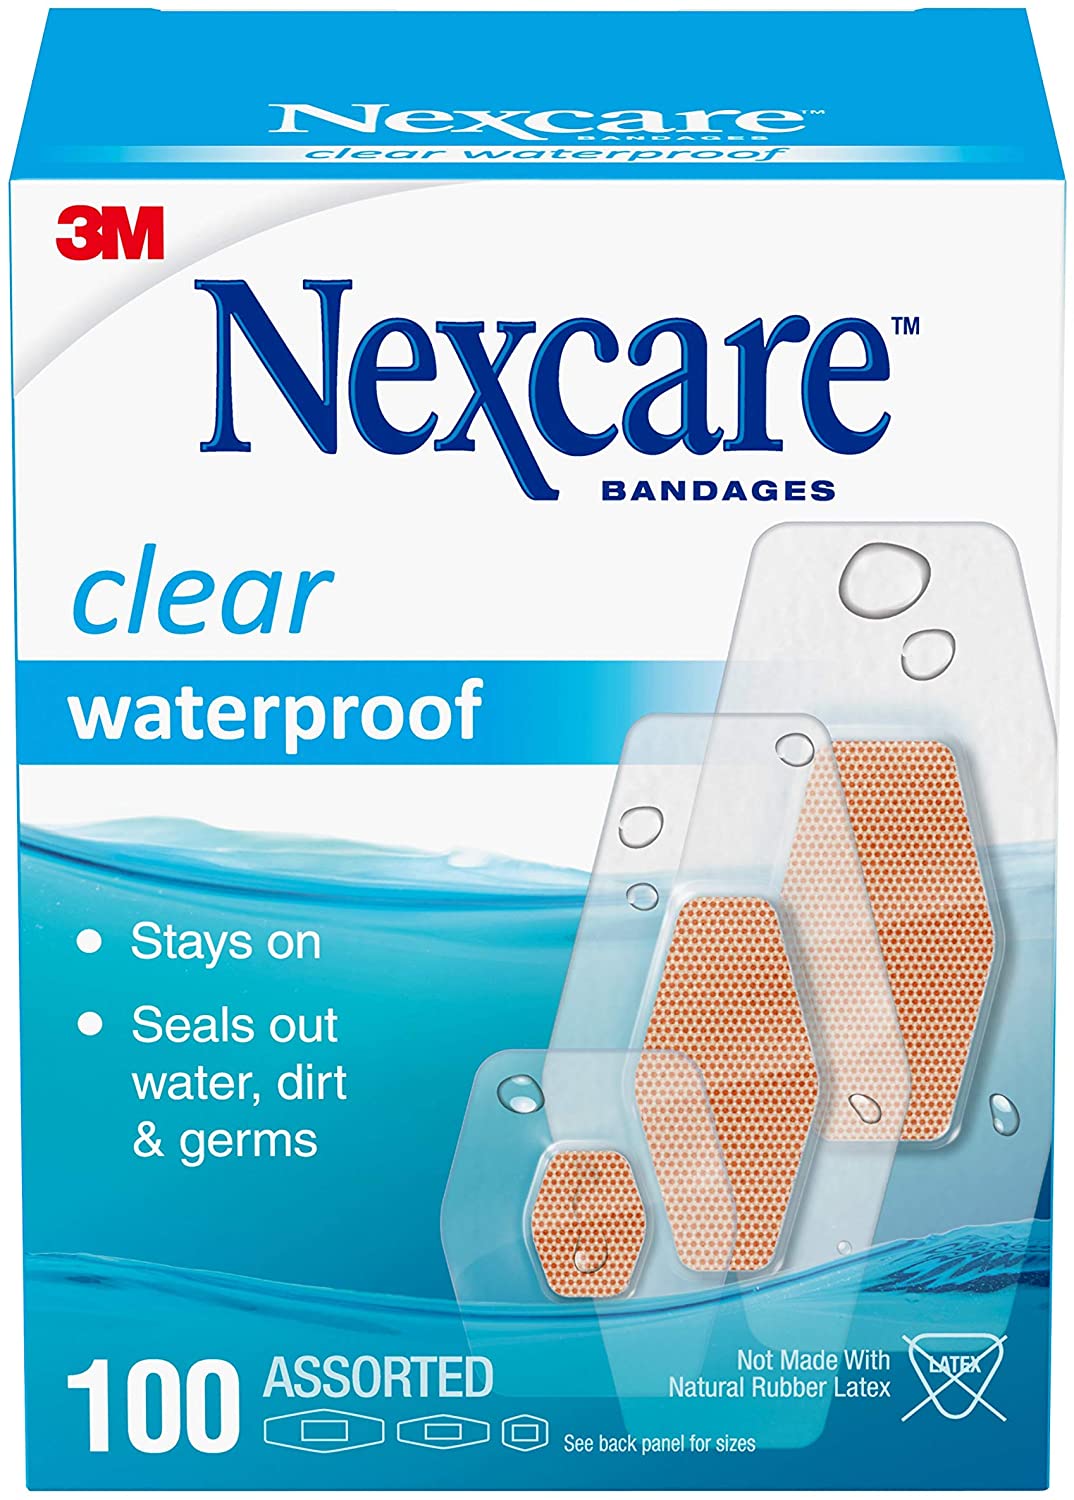 Nexcare Waterproof Bandages Family Pack, Assorted Sizes, Tan, 100 Count